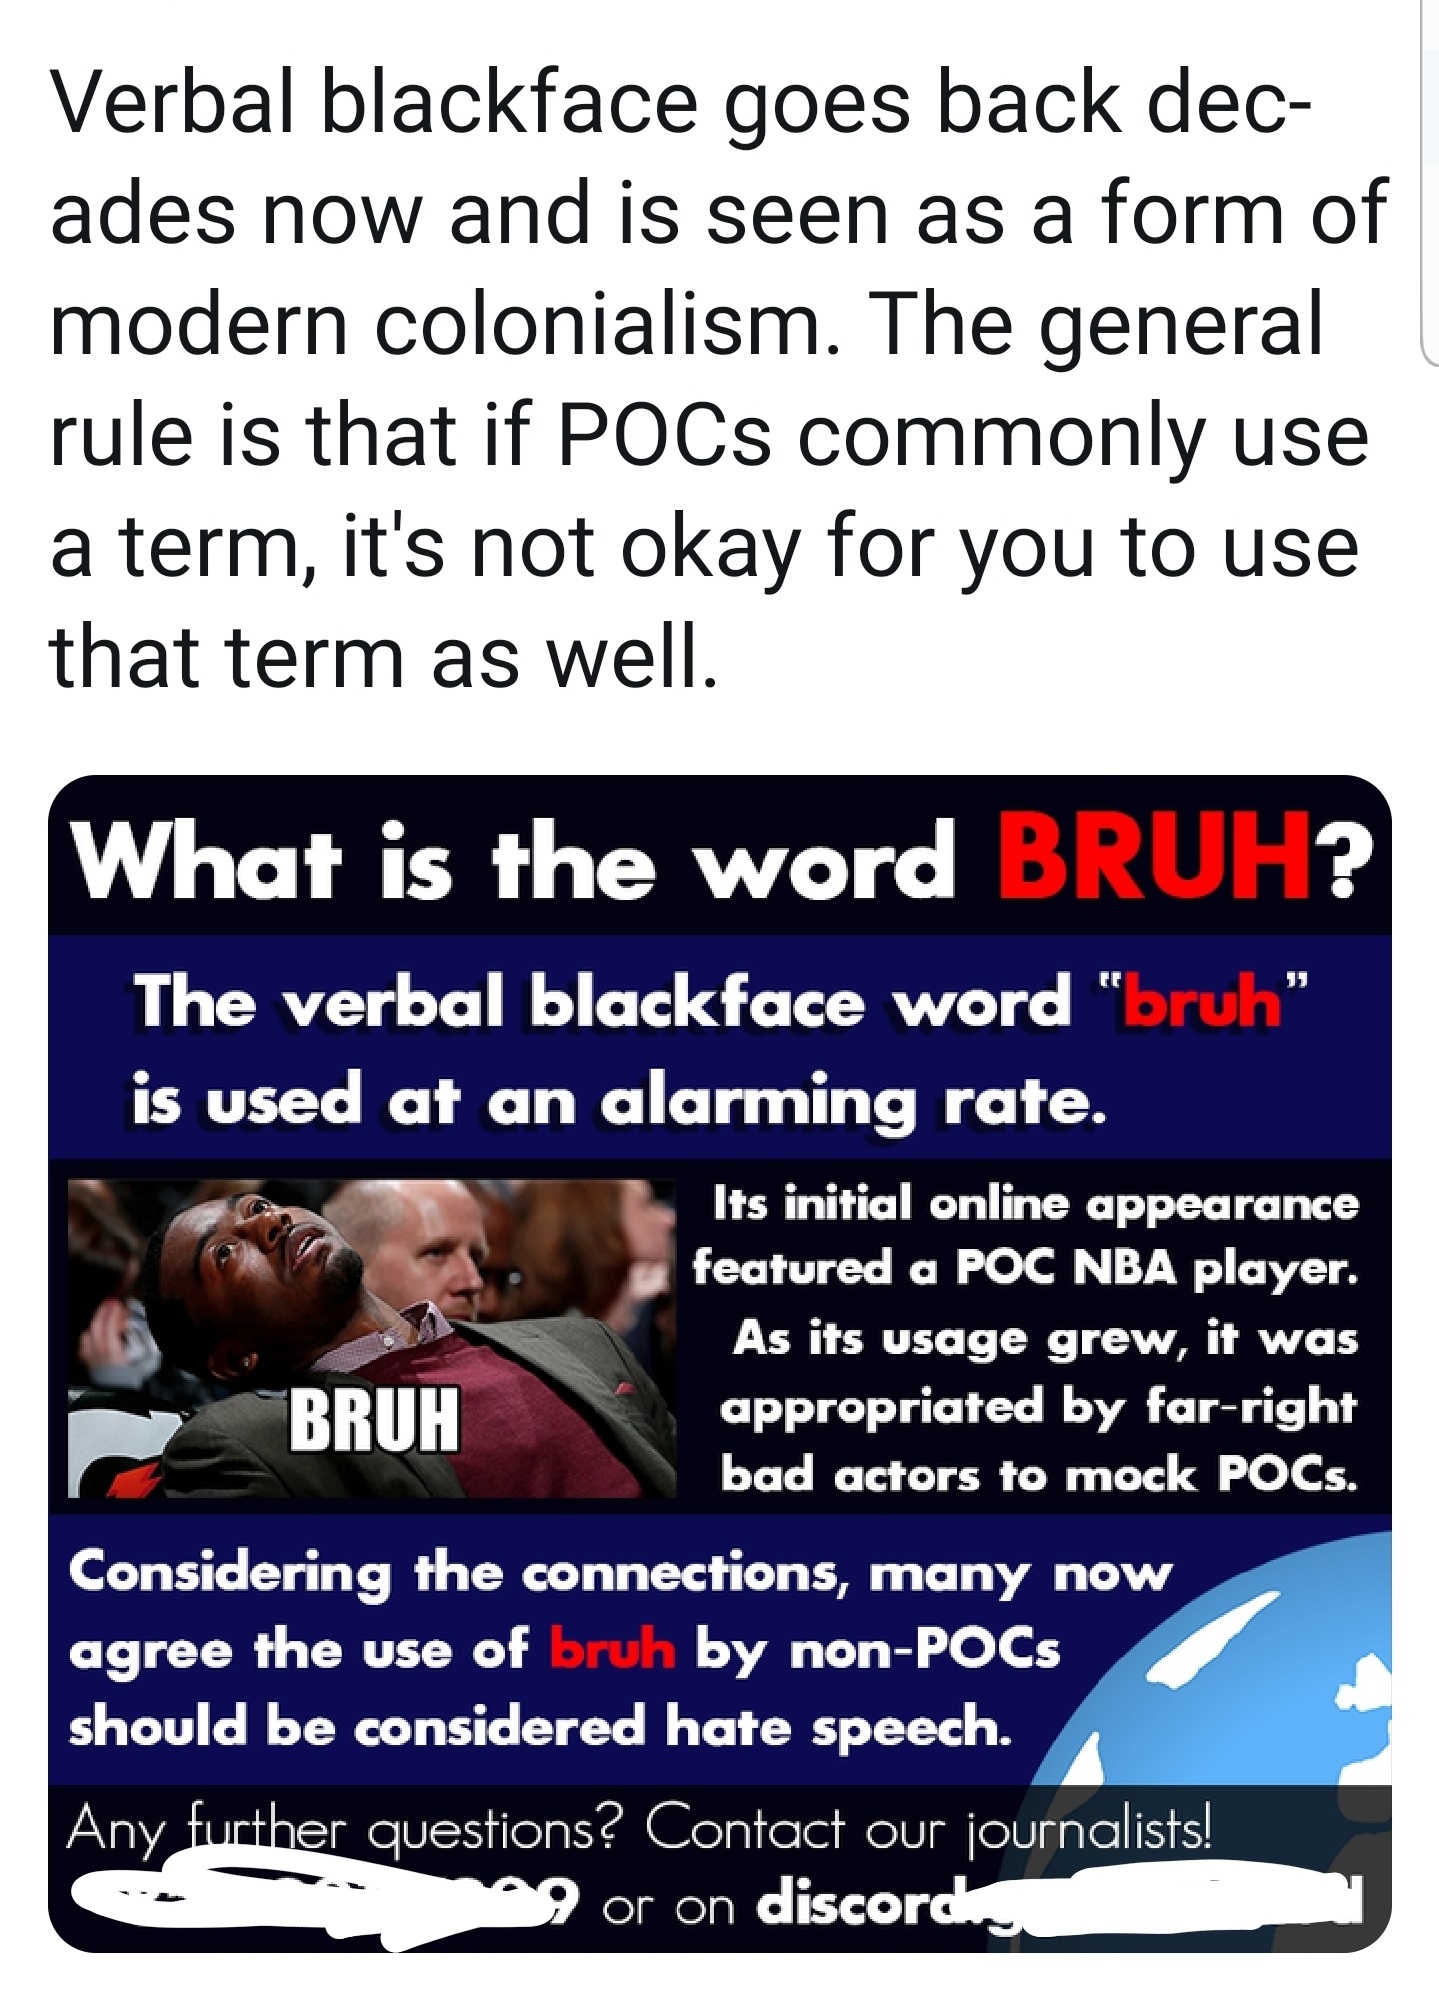 media - Verbal blackface goes back dec ades now and is seen as a form of modern colonialism. The general rule is that if POCs commonly use a term, it's not okay for you to use that term as well. What is the word Bruh? The verbal blackface word "brul", is 